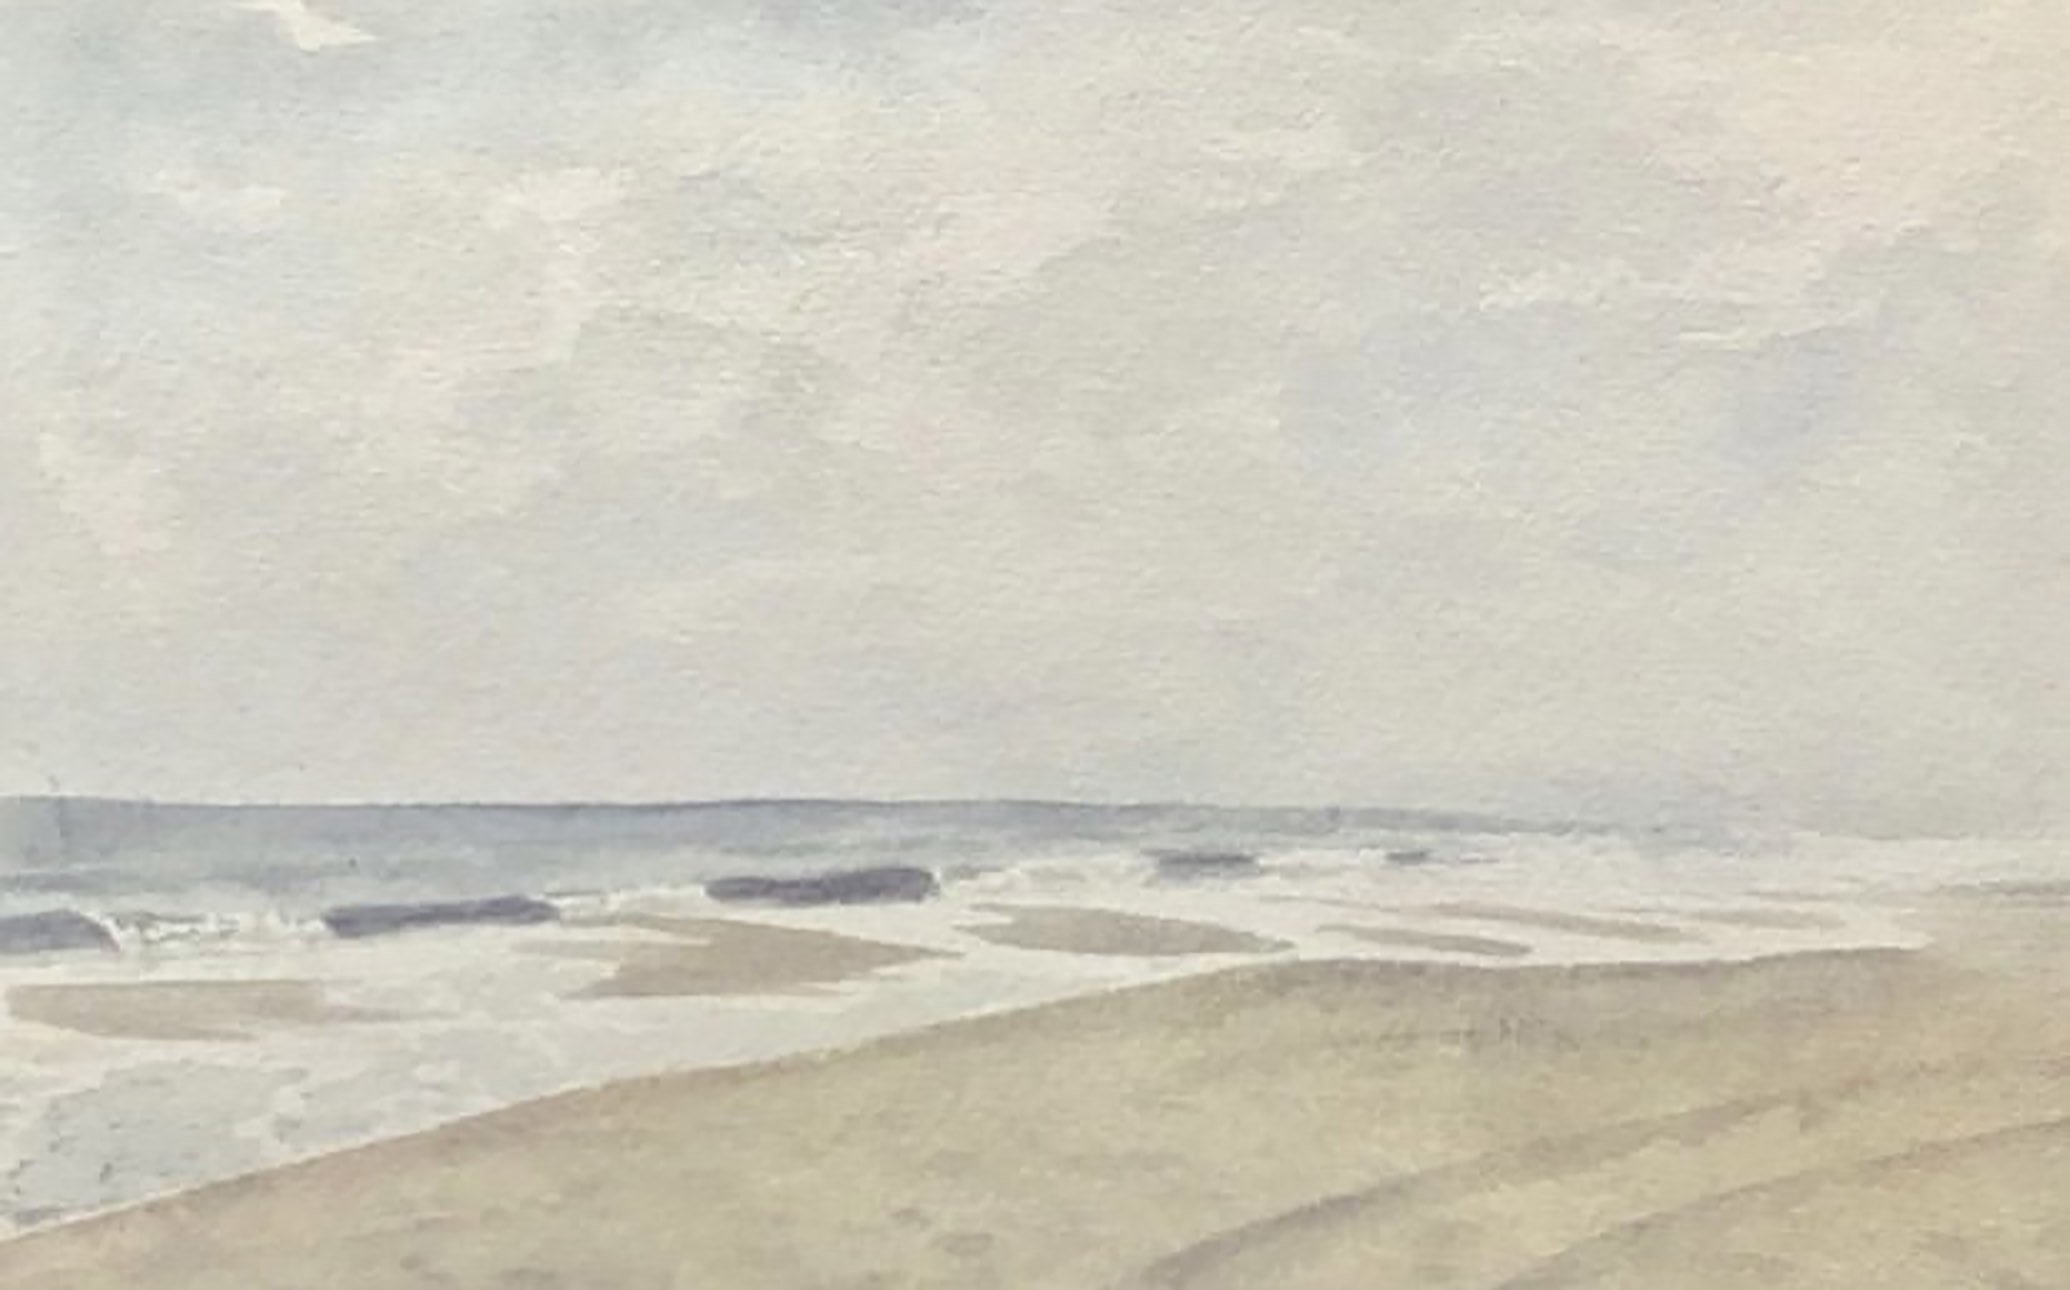    High Tide, Atlantic    watercolor on paper  6” x 10”  2021  (sold) 